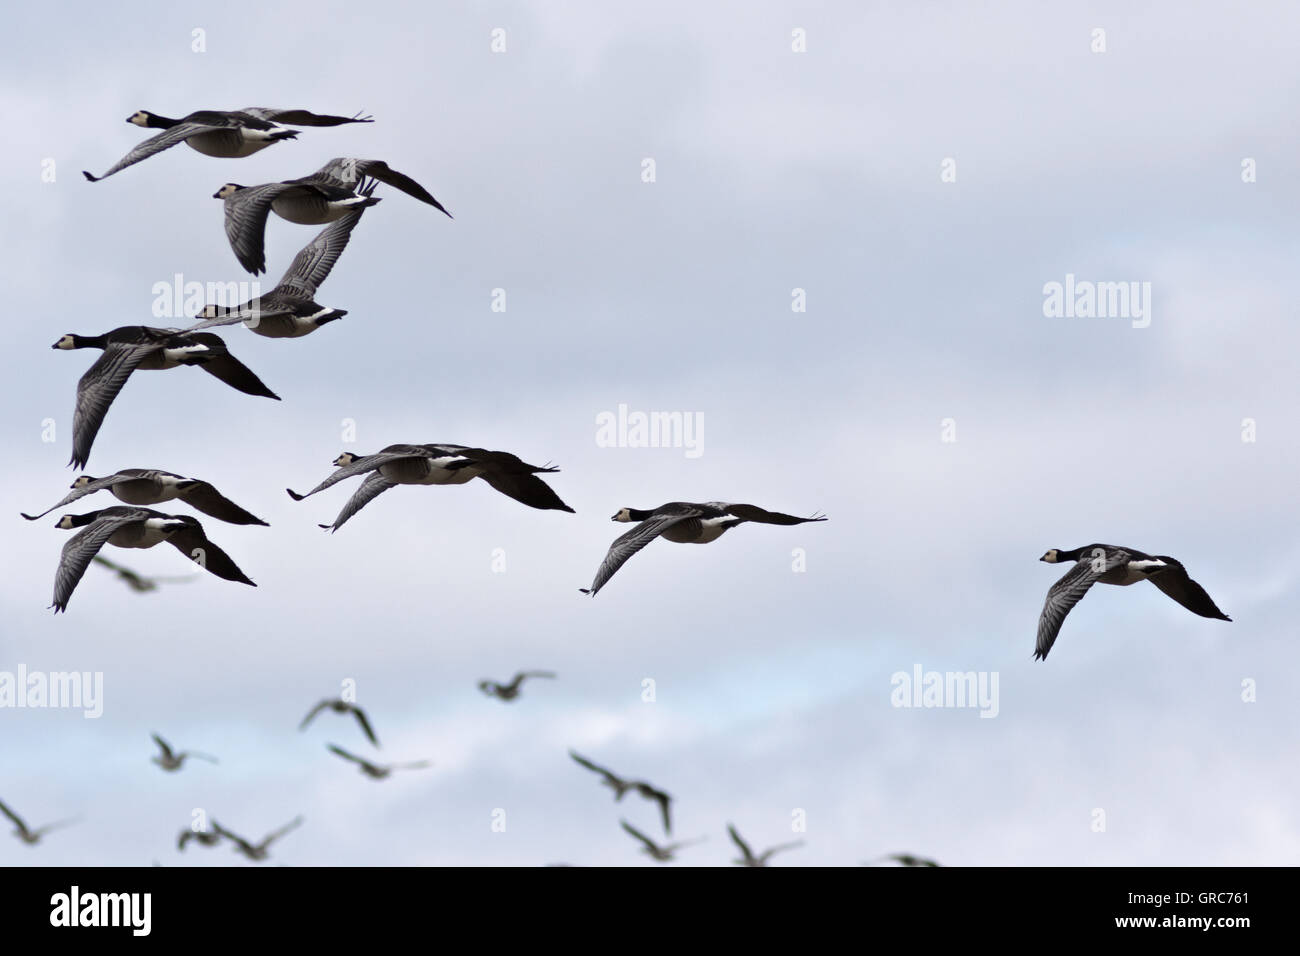 Wild Geese In The Swarm Stock Photo